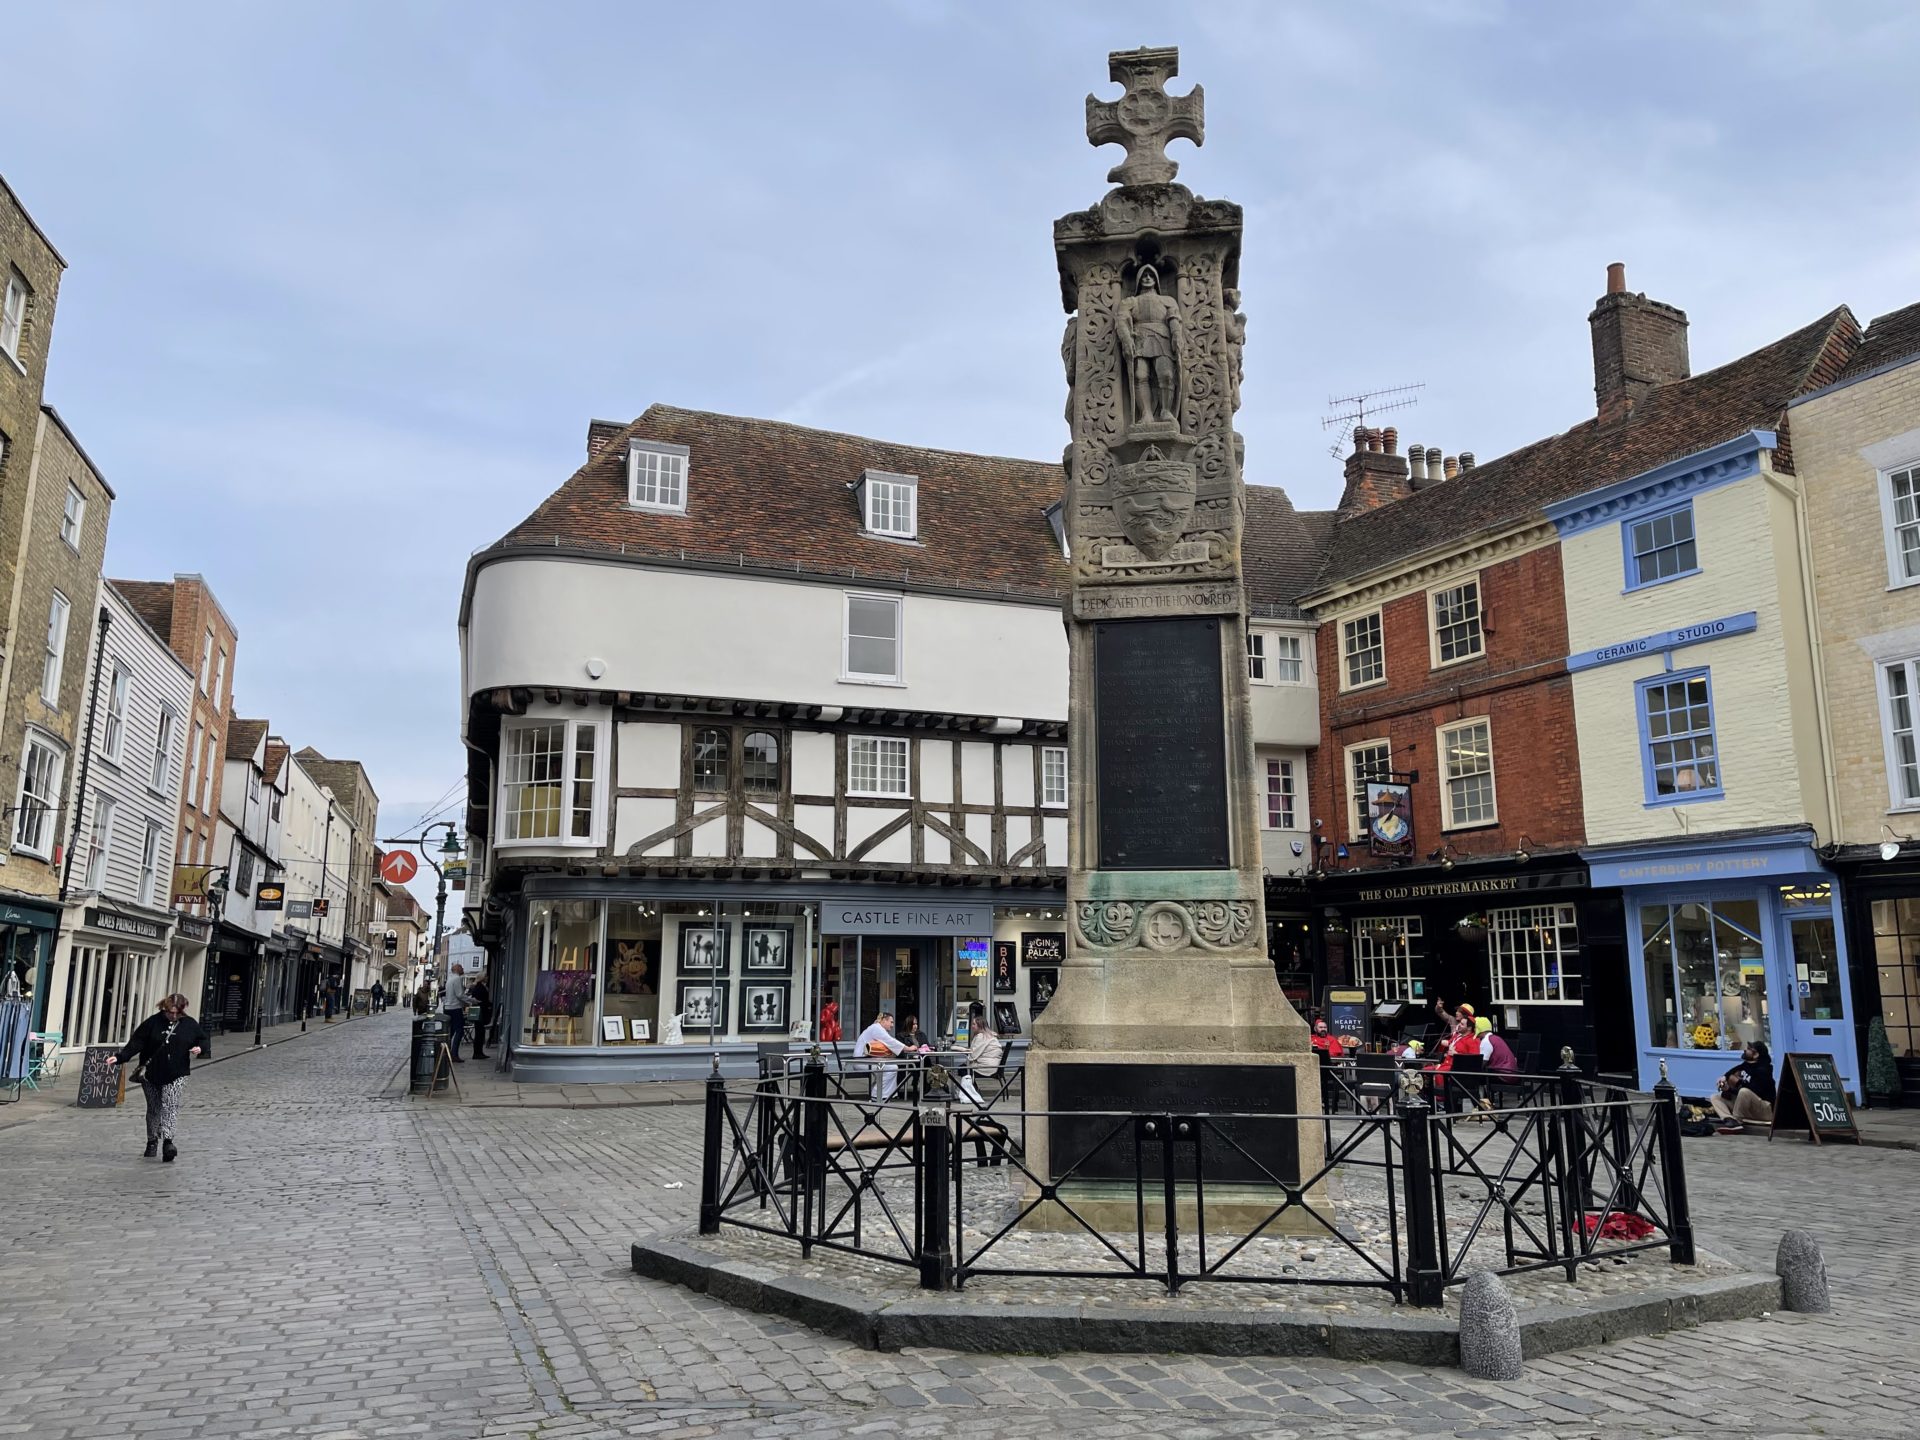 Canterbury Day Trip from London, England – Travel Guide, Things to Do, How to Get There, Tours, & More